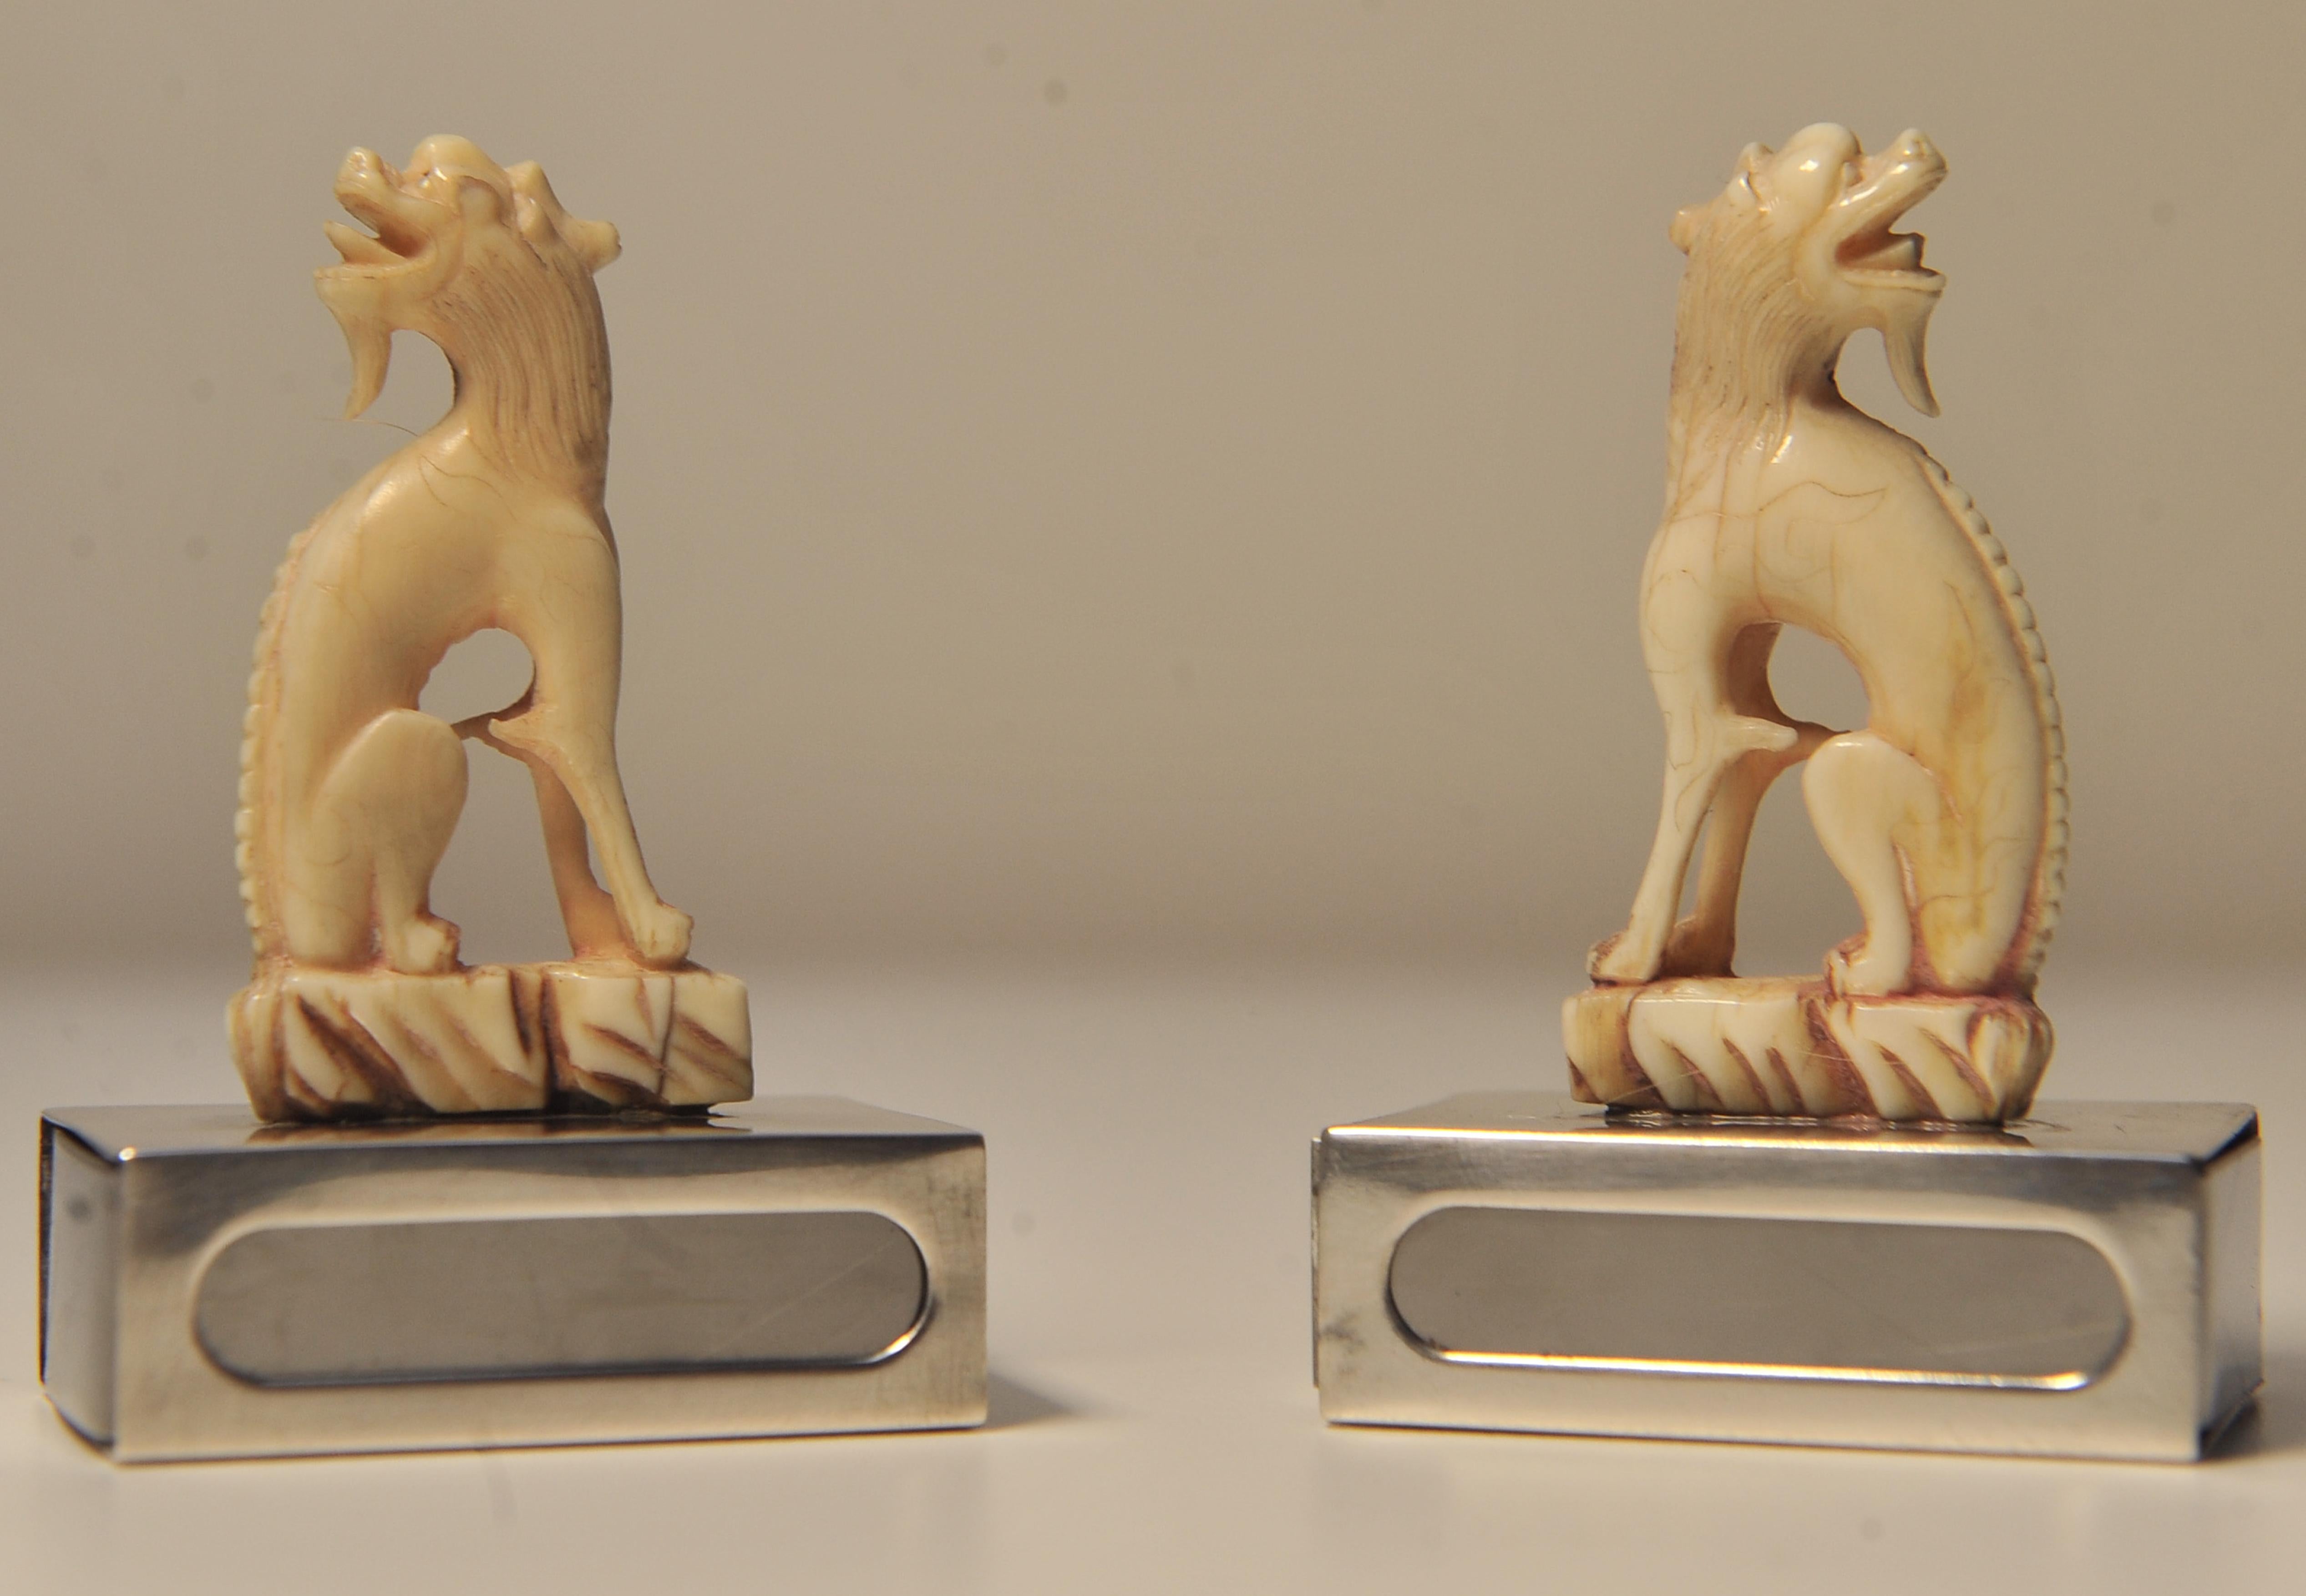 A Delicate Pair Of Ivorine Dogs of Foo Matching Matchstick Box Holders.
Bases Have Silver Mark Stamp.

Chinese guardian lions, or imperial guardian lions, are a traditional Chinese architectural ornament, but the origins lie deep in much older